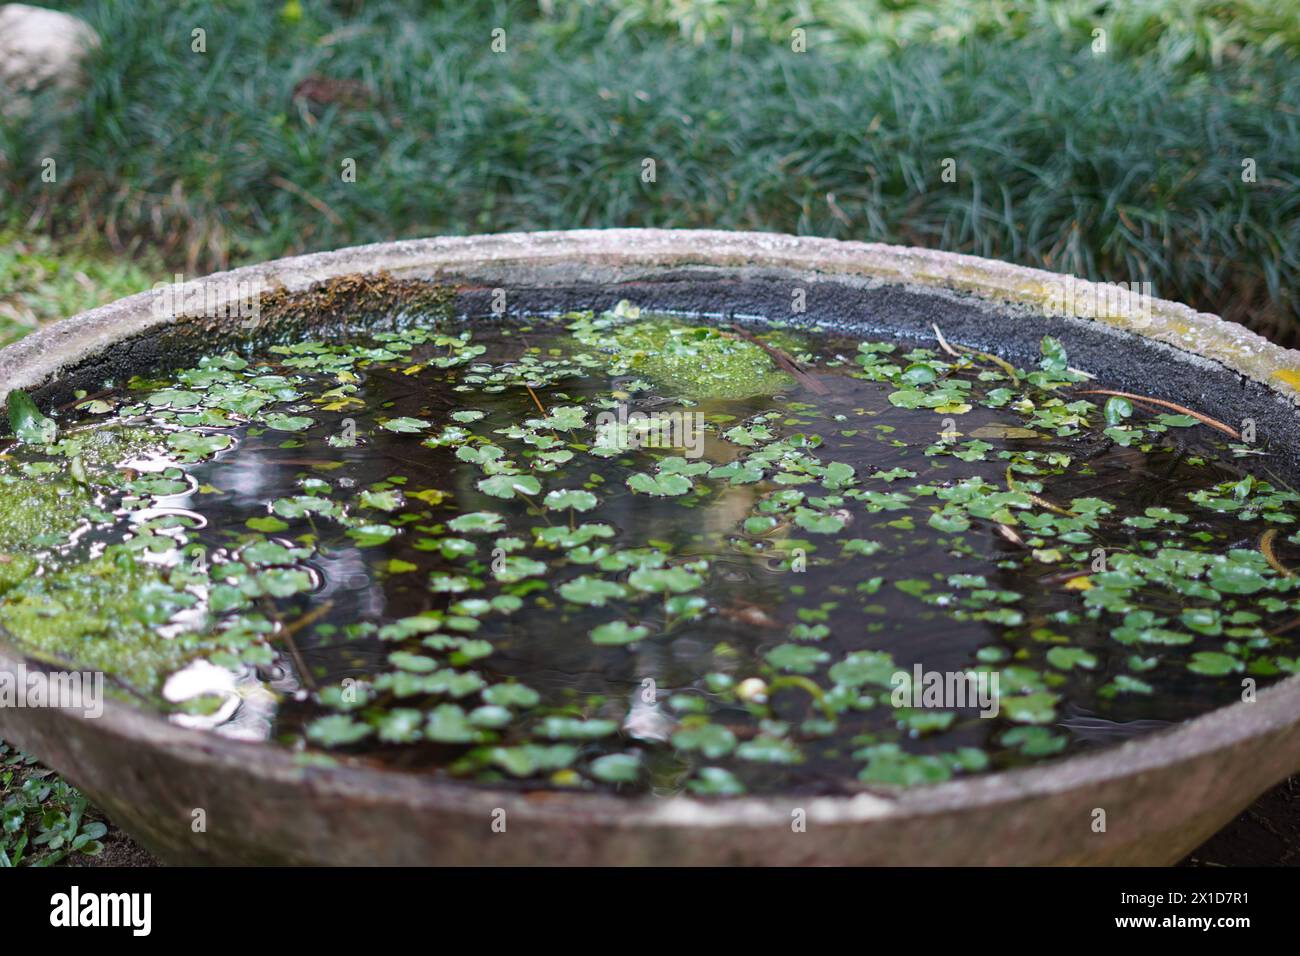 Small leaves floating on the water with soil settling beneath them in a large cement pot Stock Photo